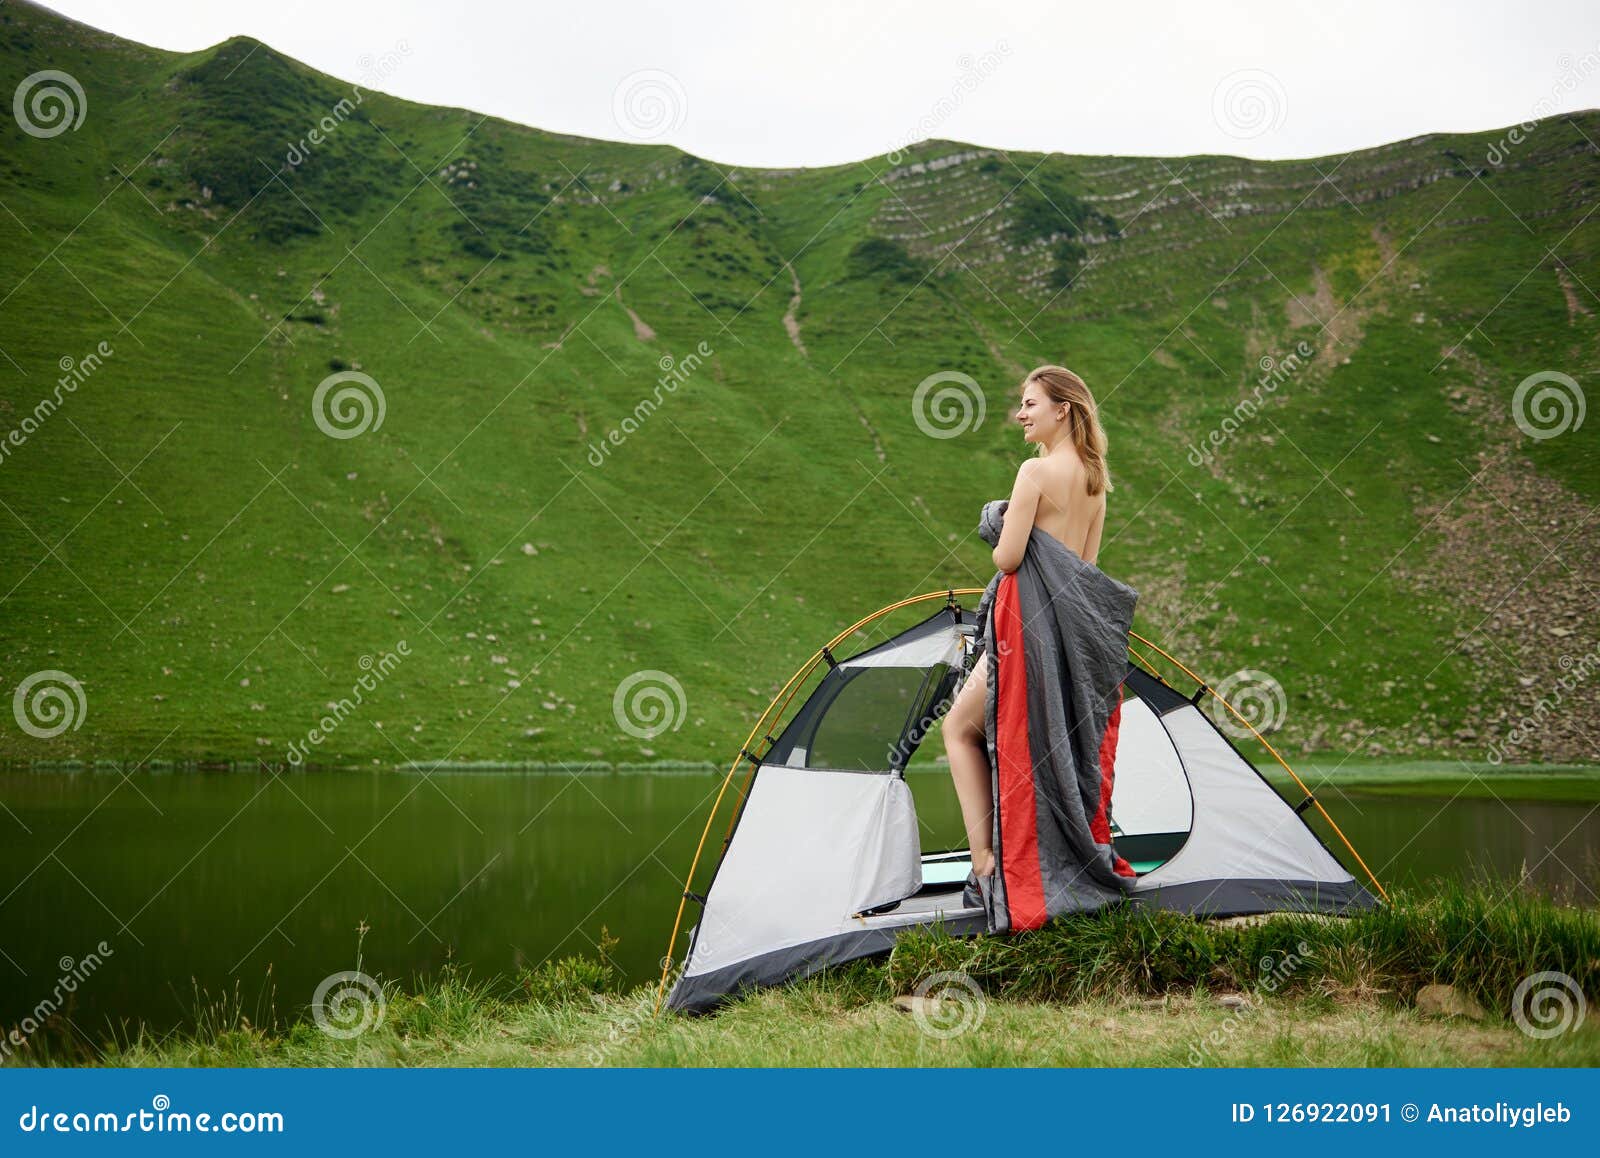 amateur nude camping pictures